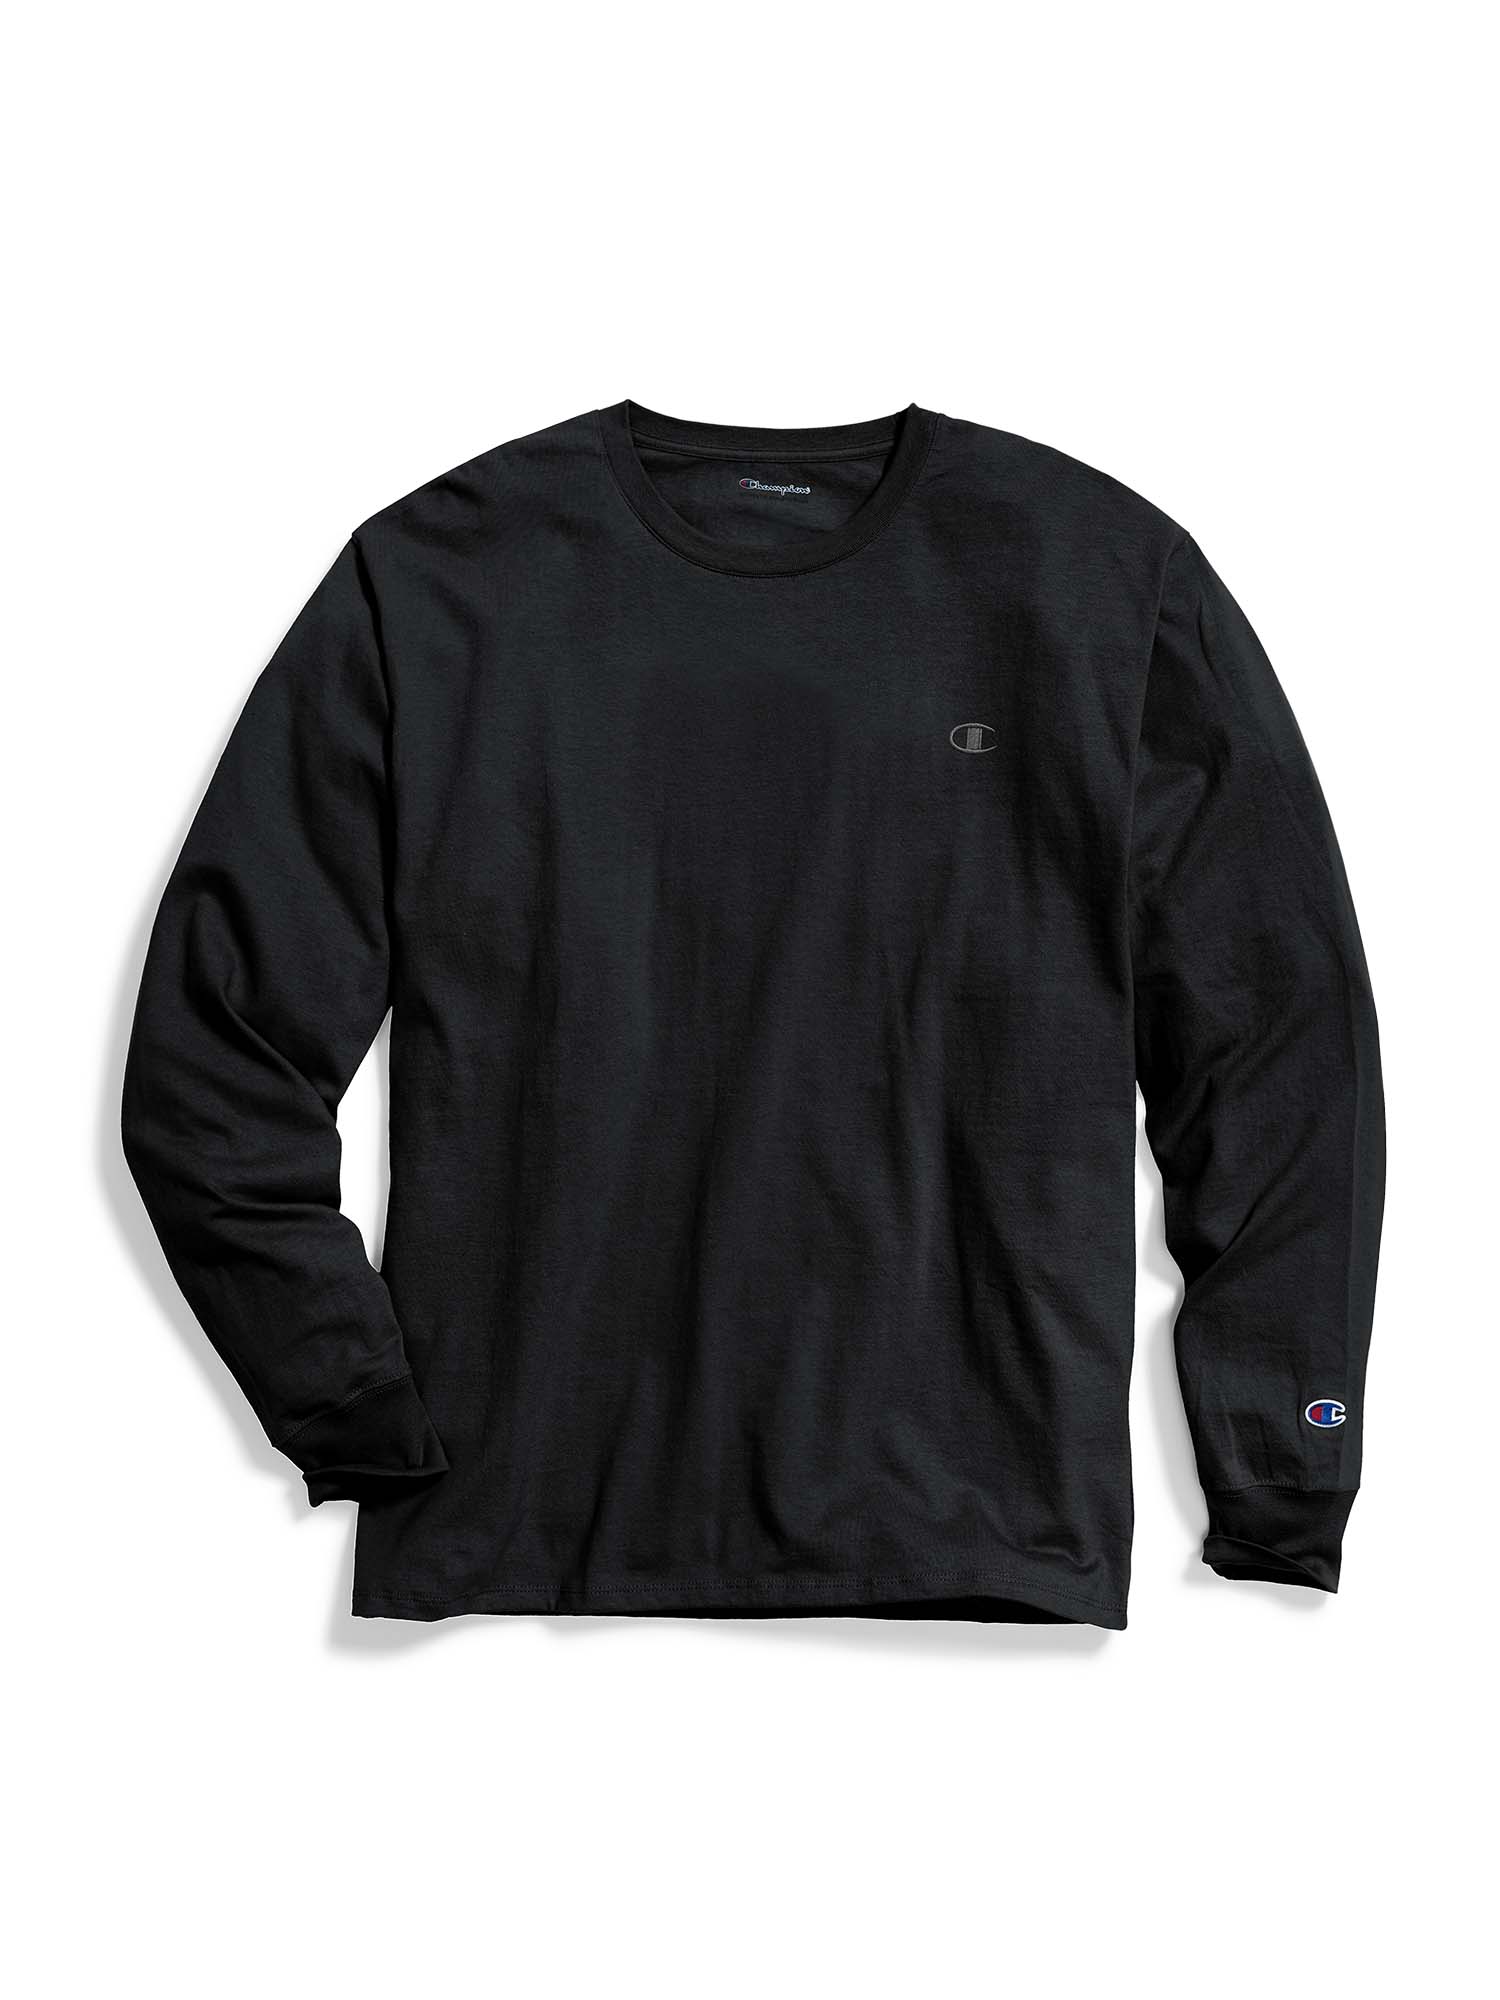 Champion Men's and Big Men's Classic Solid Jersey Long Sleeve T-Shirt, Sizes S-2XL - image 5 of 7